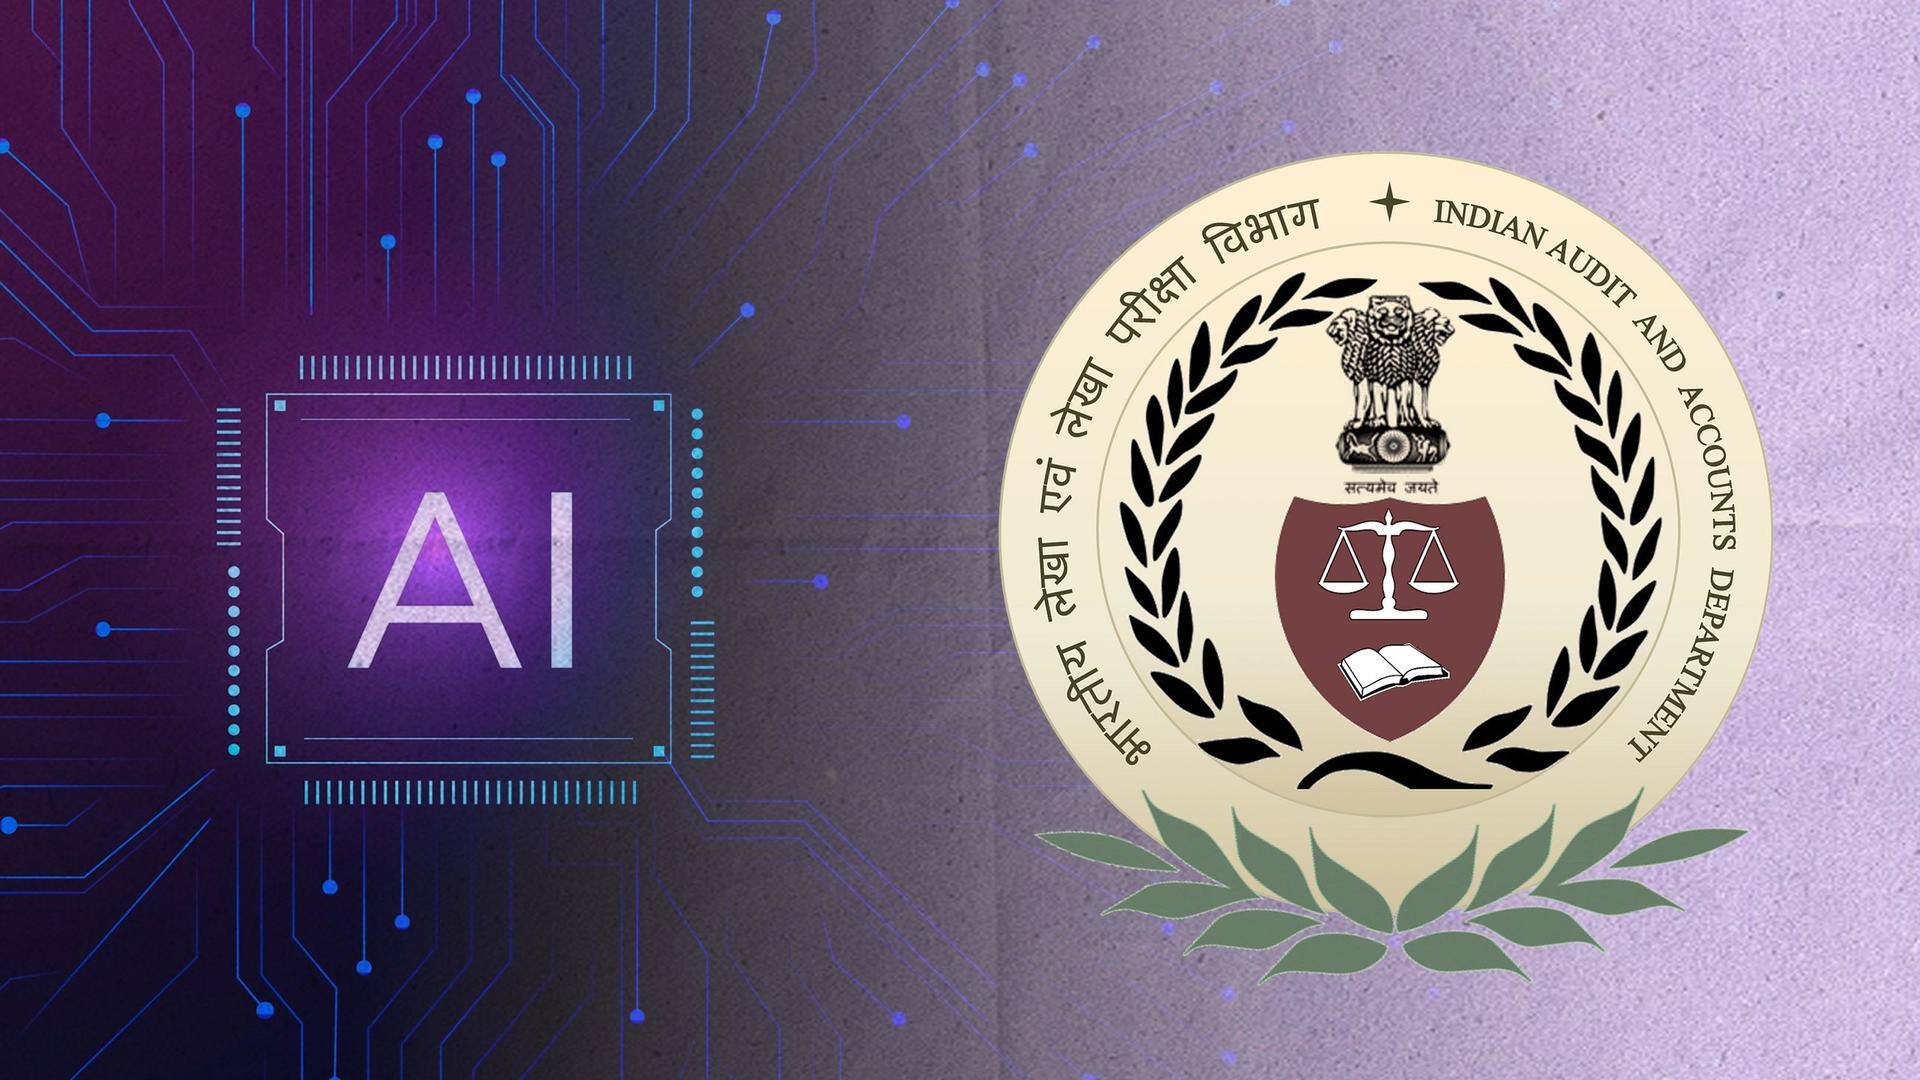 After India's Income Tax Department, CAG is adopting AI